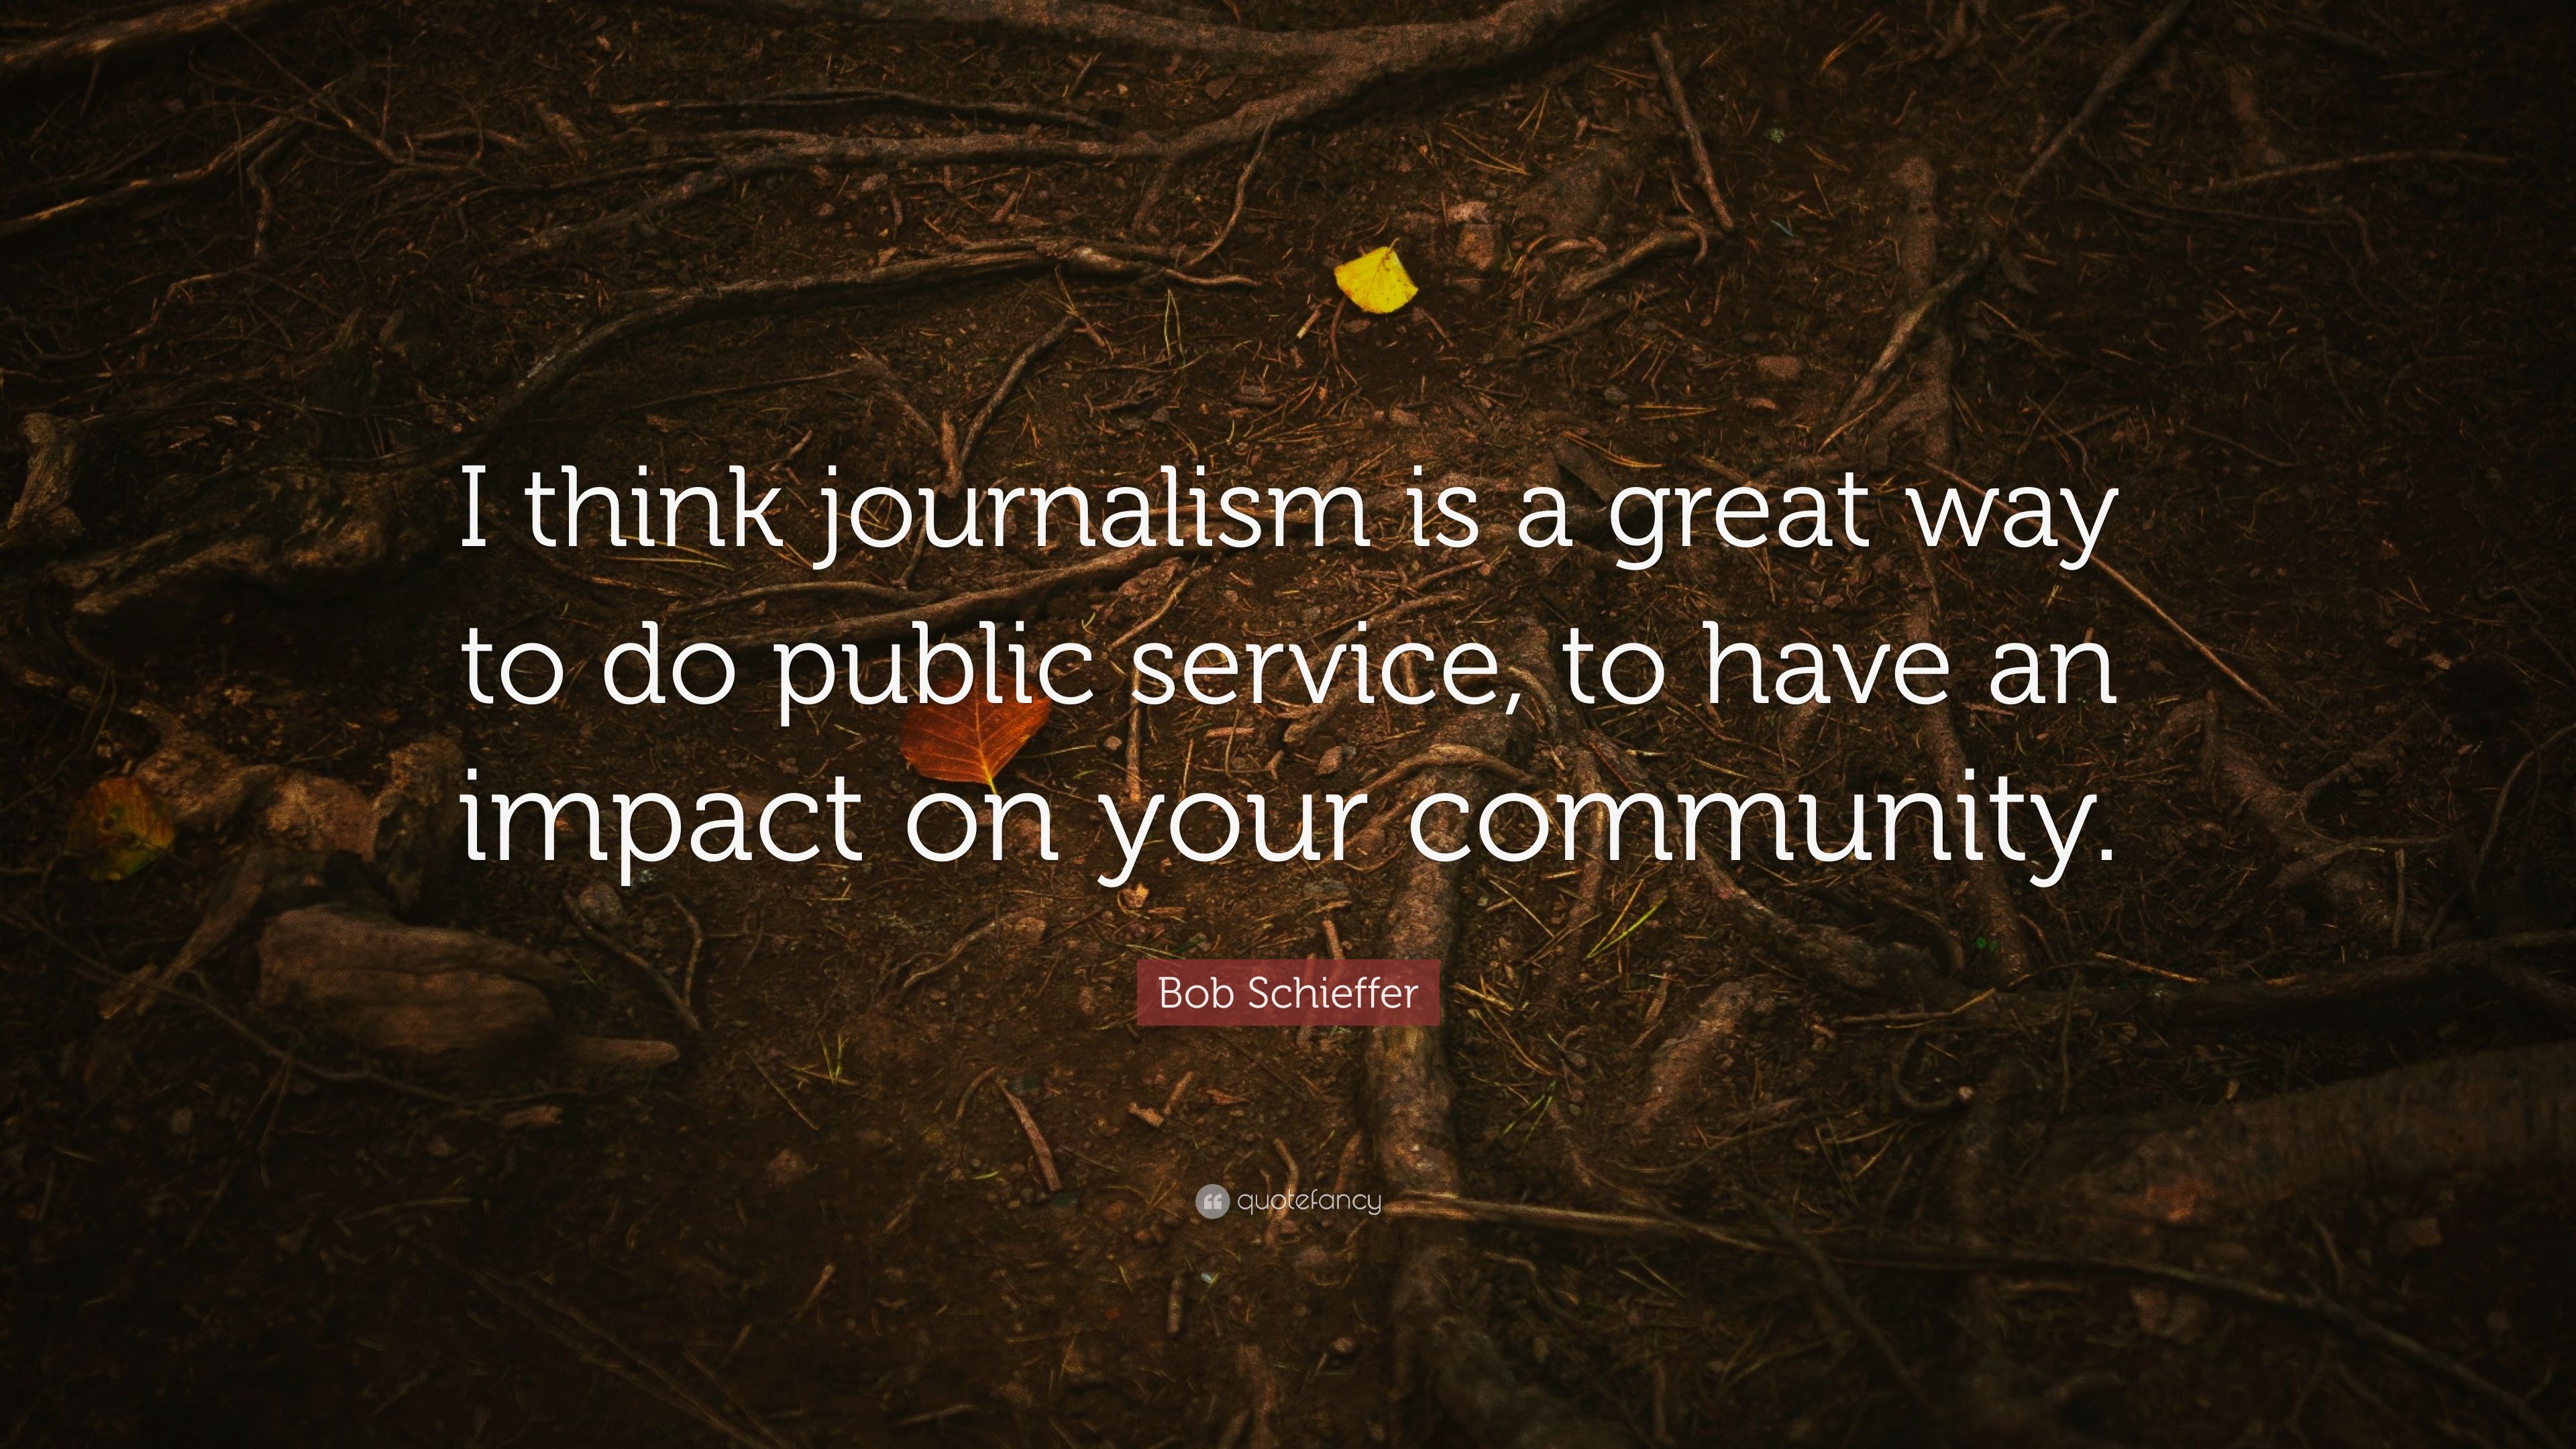 Bob Schieffer Quote: “I think journalism is a great way to do public service, to have an impact on your community.” (7 wallpaper)